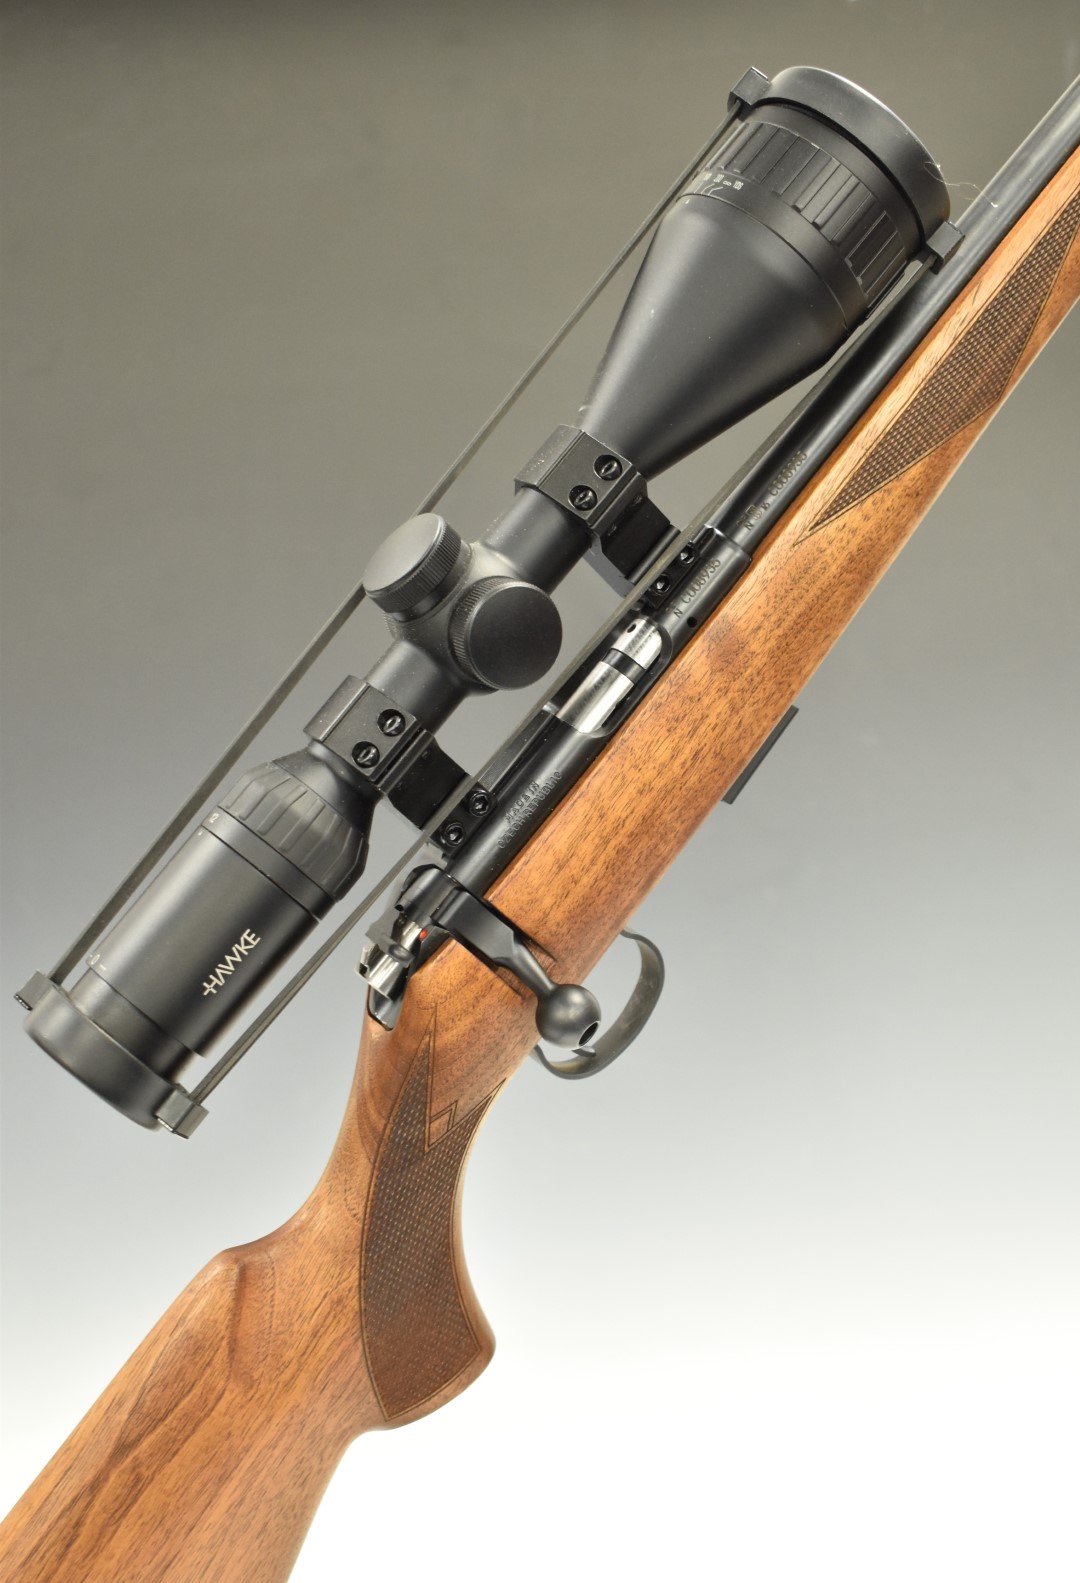 Cogswell & Harrison Certus .22LR semi-automatic rifle with chequered grip and forend, leather sling,